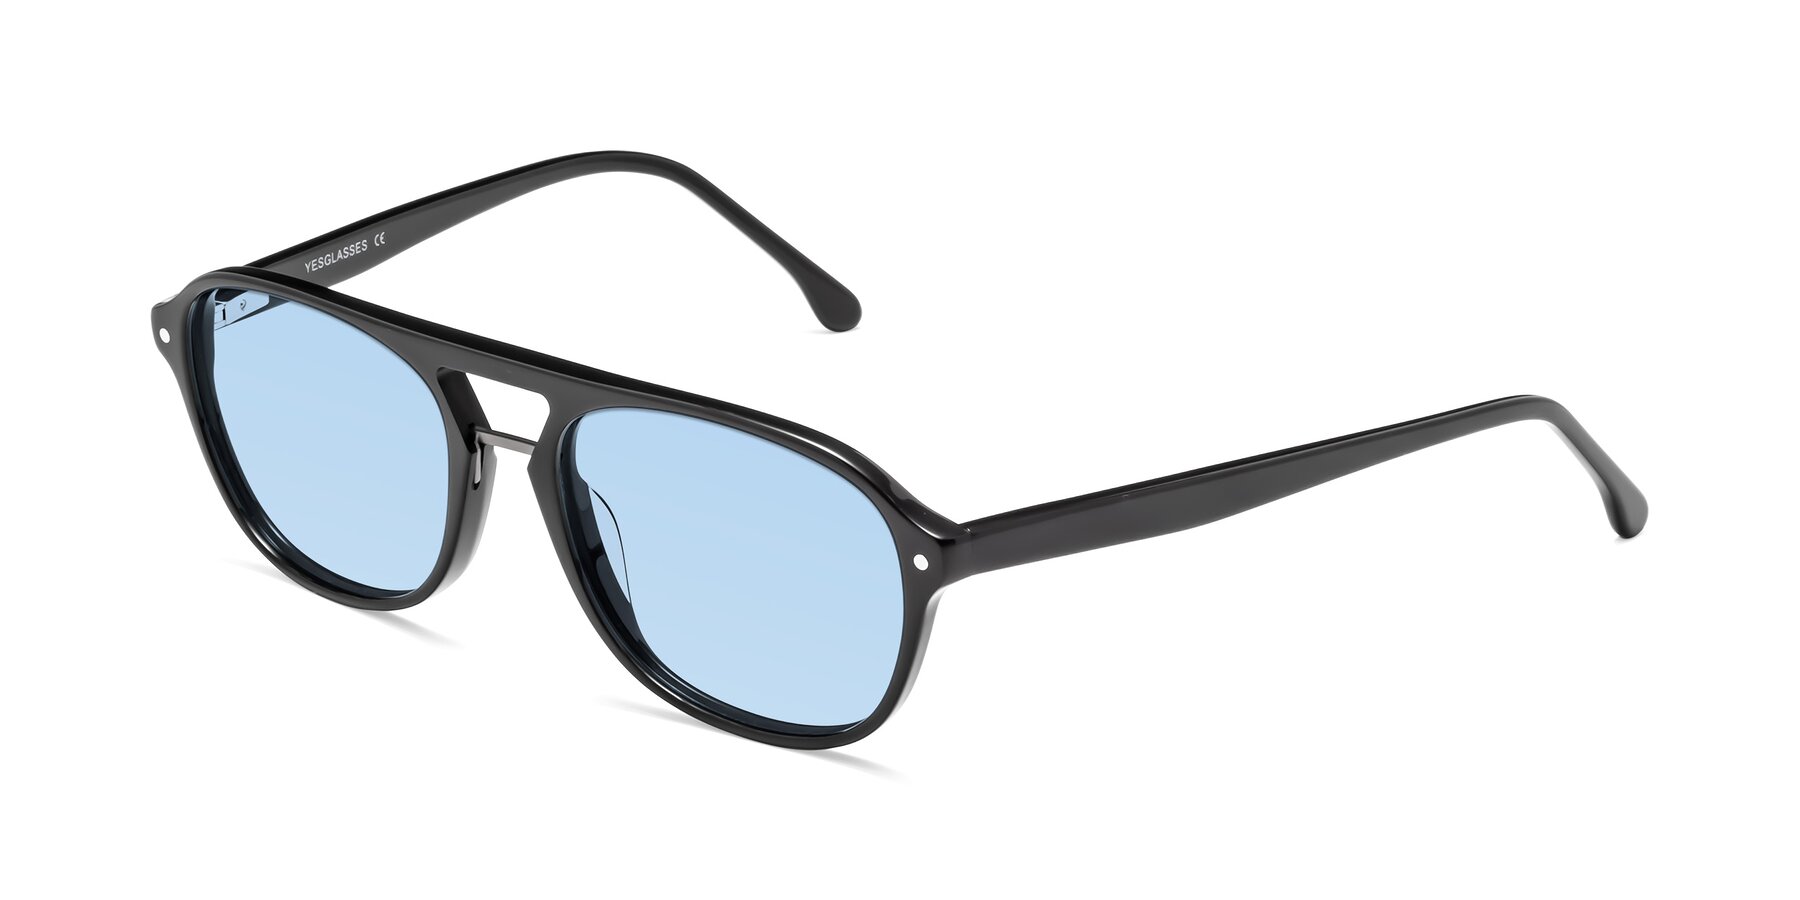 Angle of 17416 in Black with Light Blue Tinted Lenses